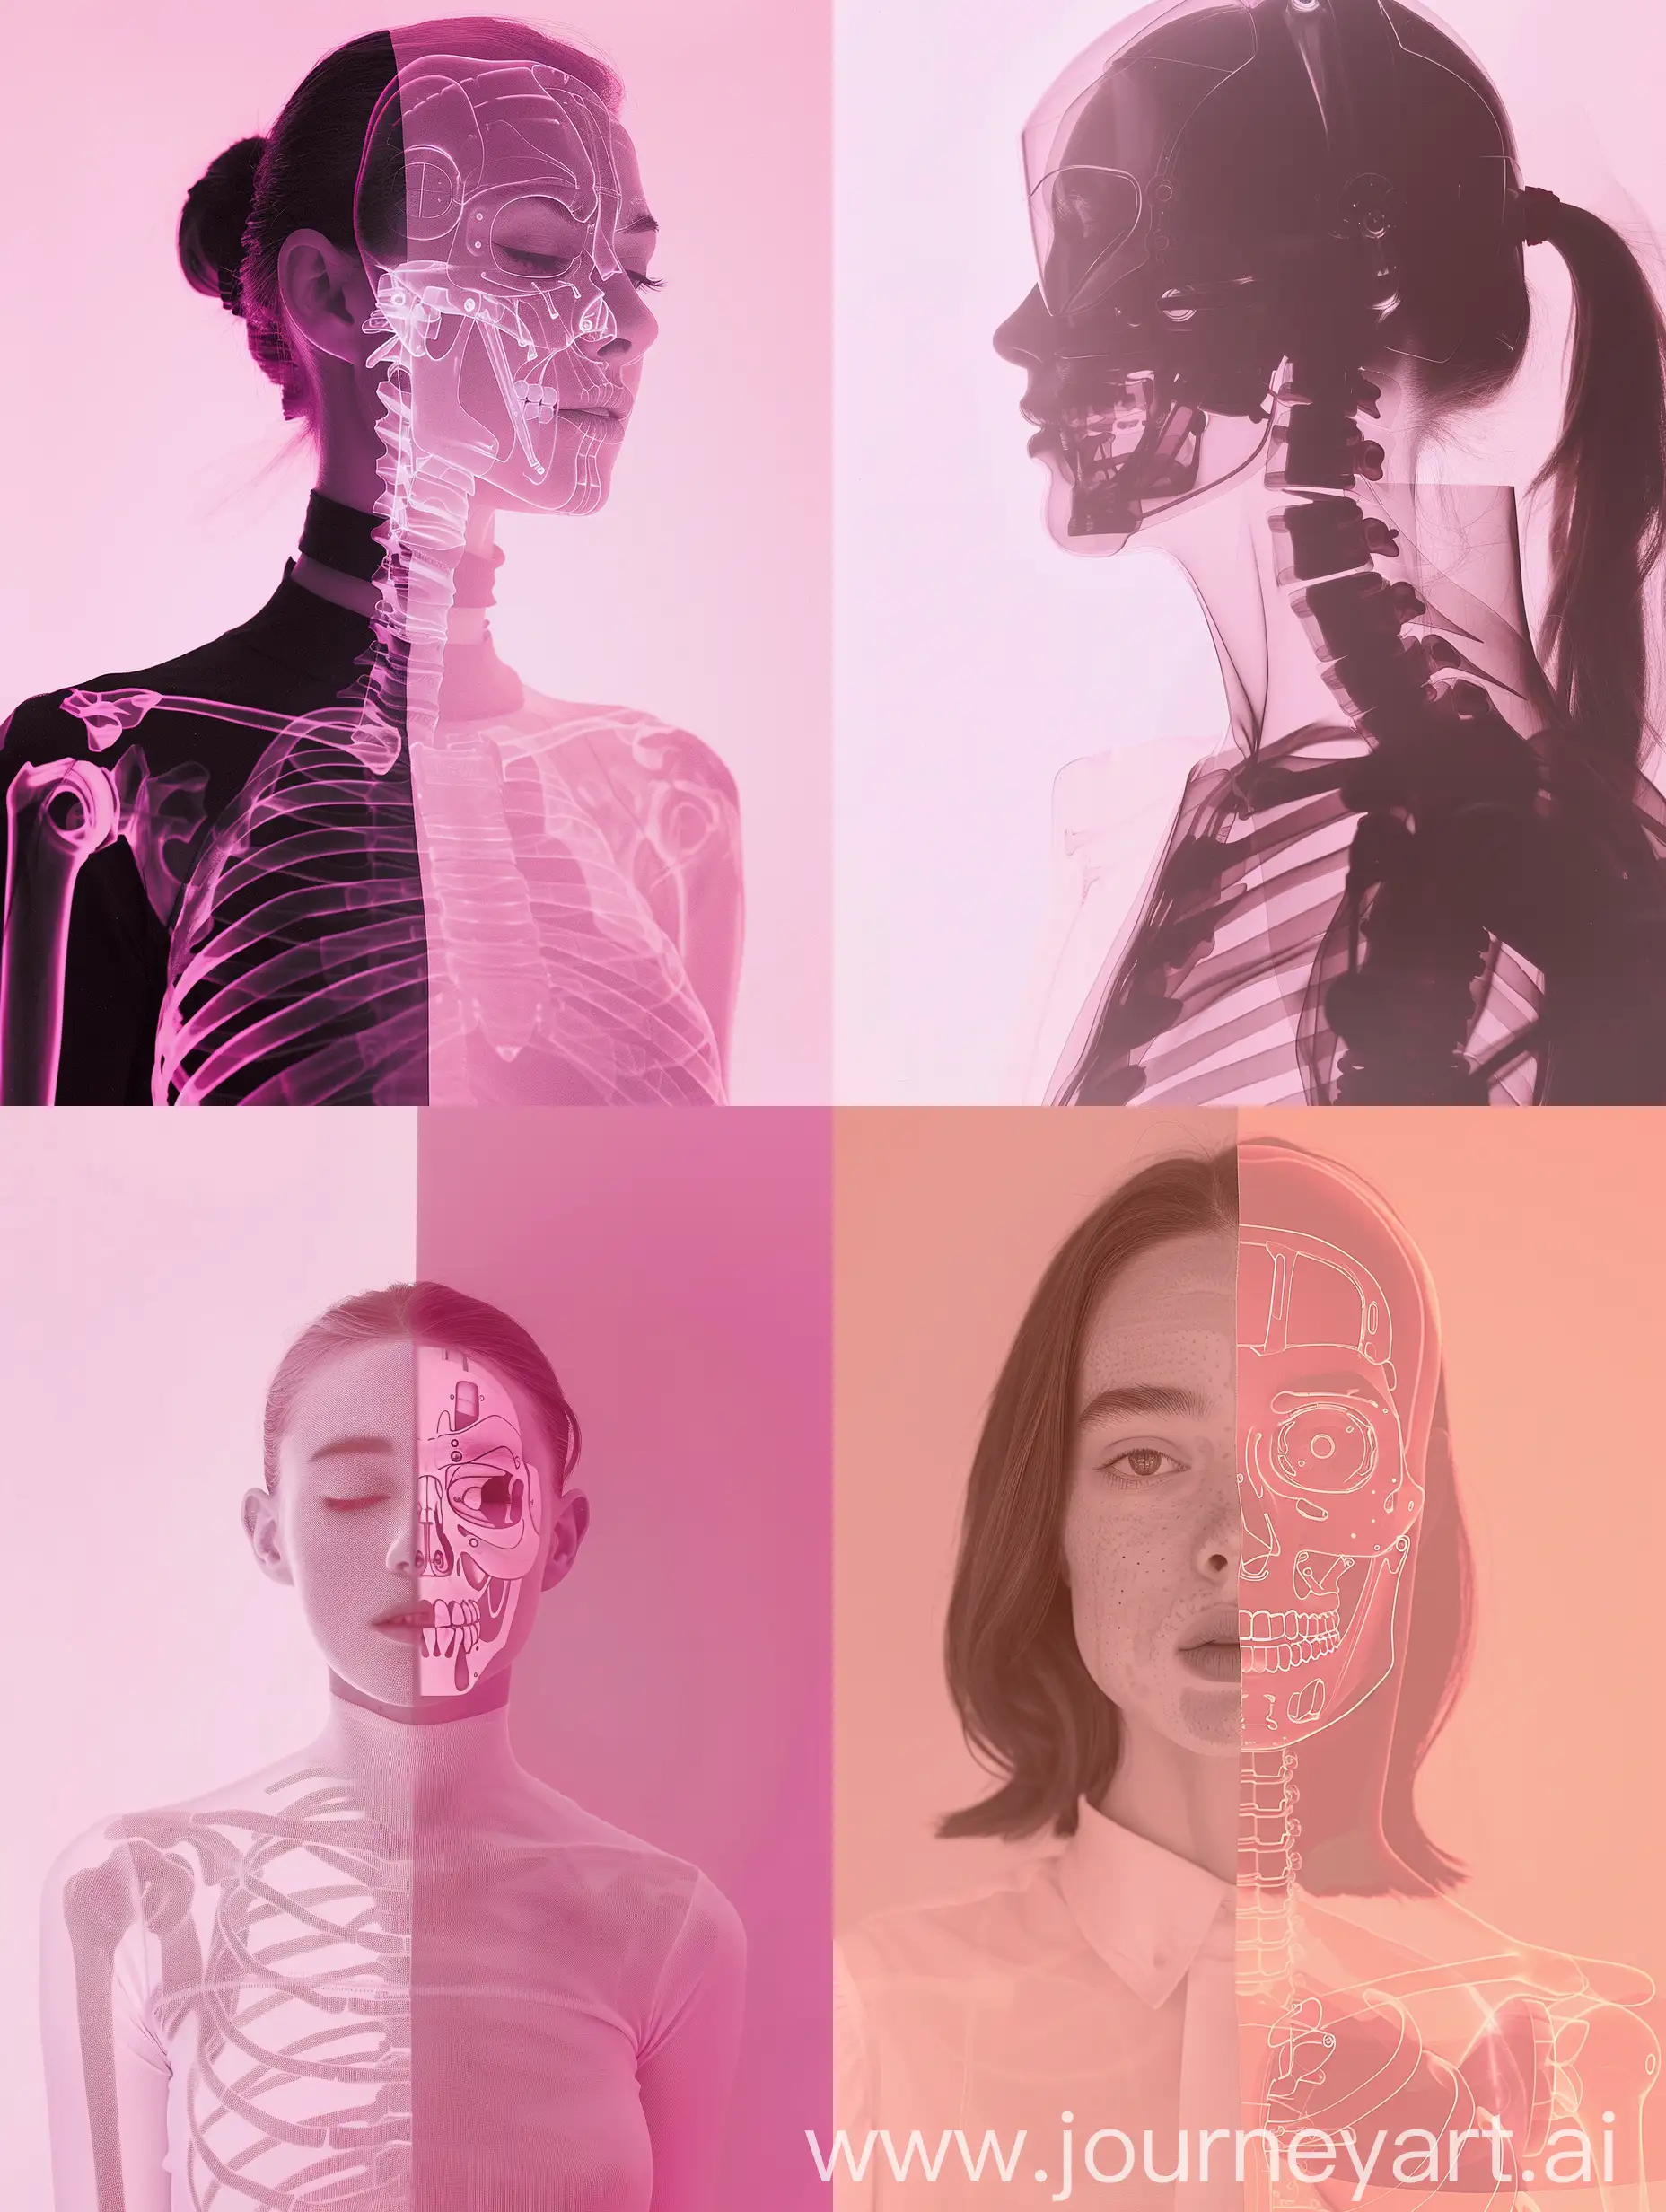 absurd, fine-art photography, half woman half robot, of a woman, x-ray, light-pink lighting, in the style of minimalism photography, studio photography --ar 3:4 --v 6.0 --style raw


